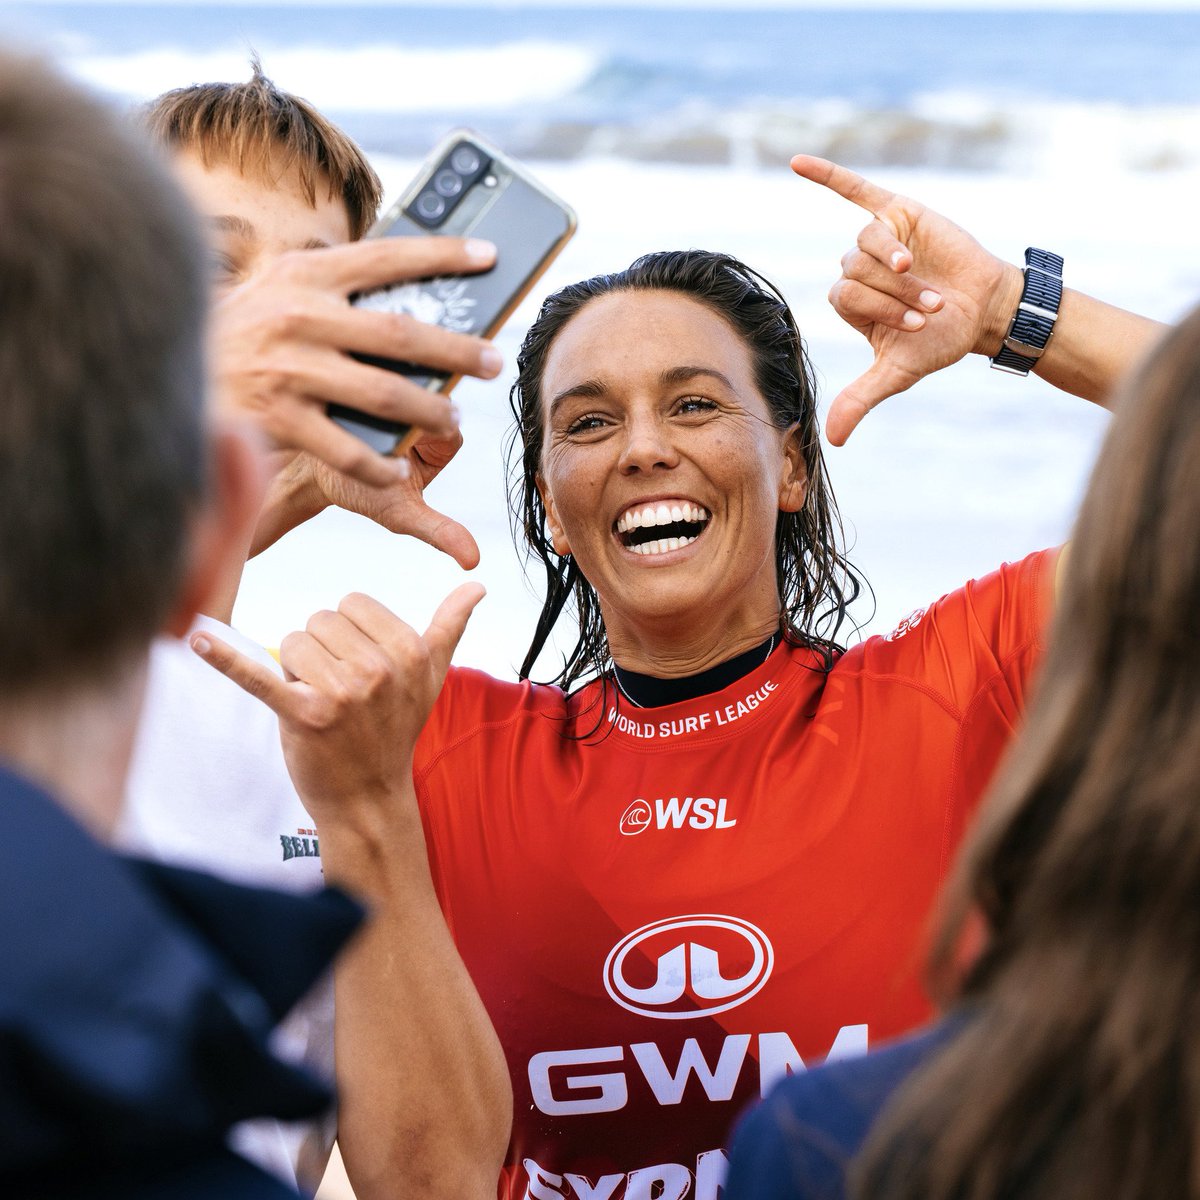 What a special gift to receive, all that Sunday game day energy…from the ocean, the crowd and a special day in #MothersDay 🫶🏼 Looking forward to finals day tomorrow @wsl #GWMSydneySurfPro